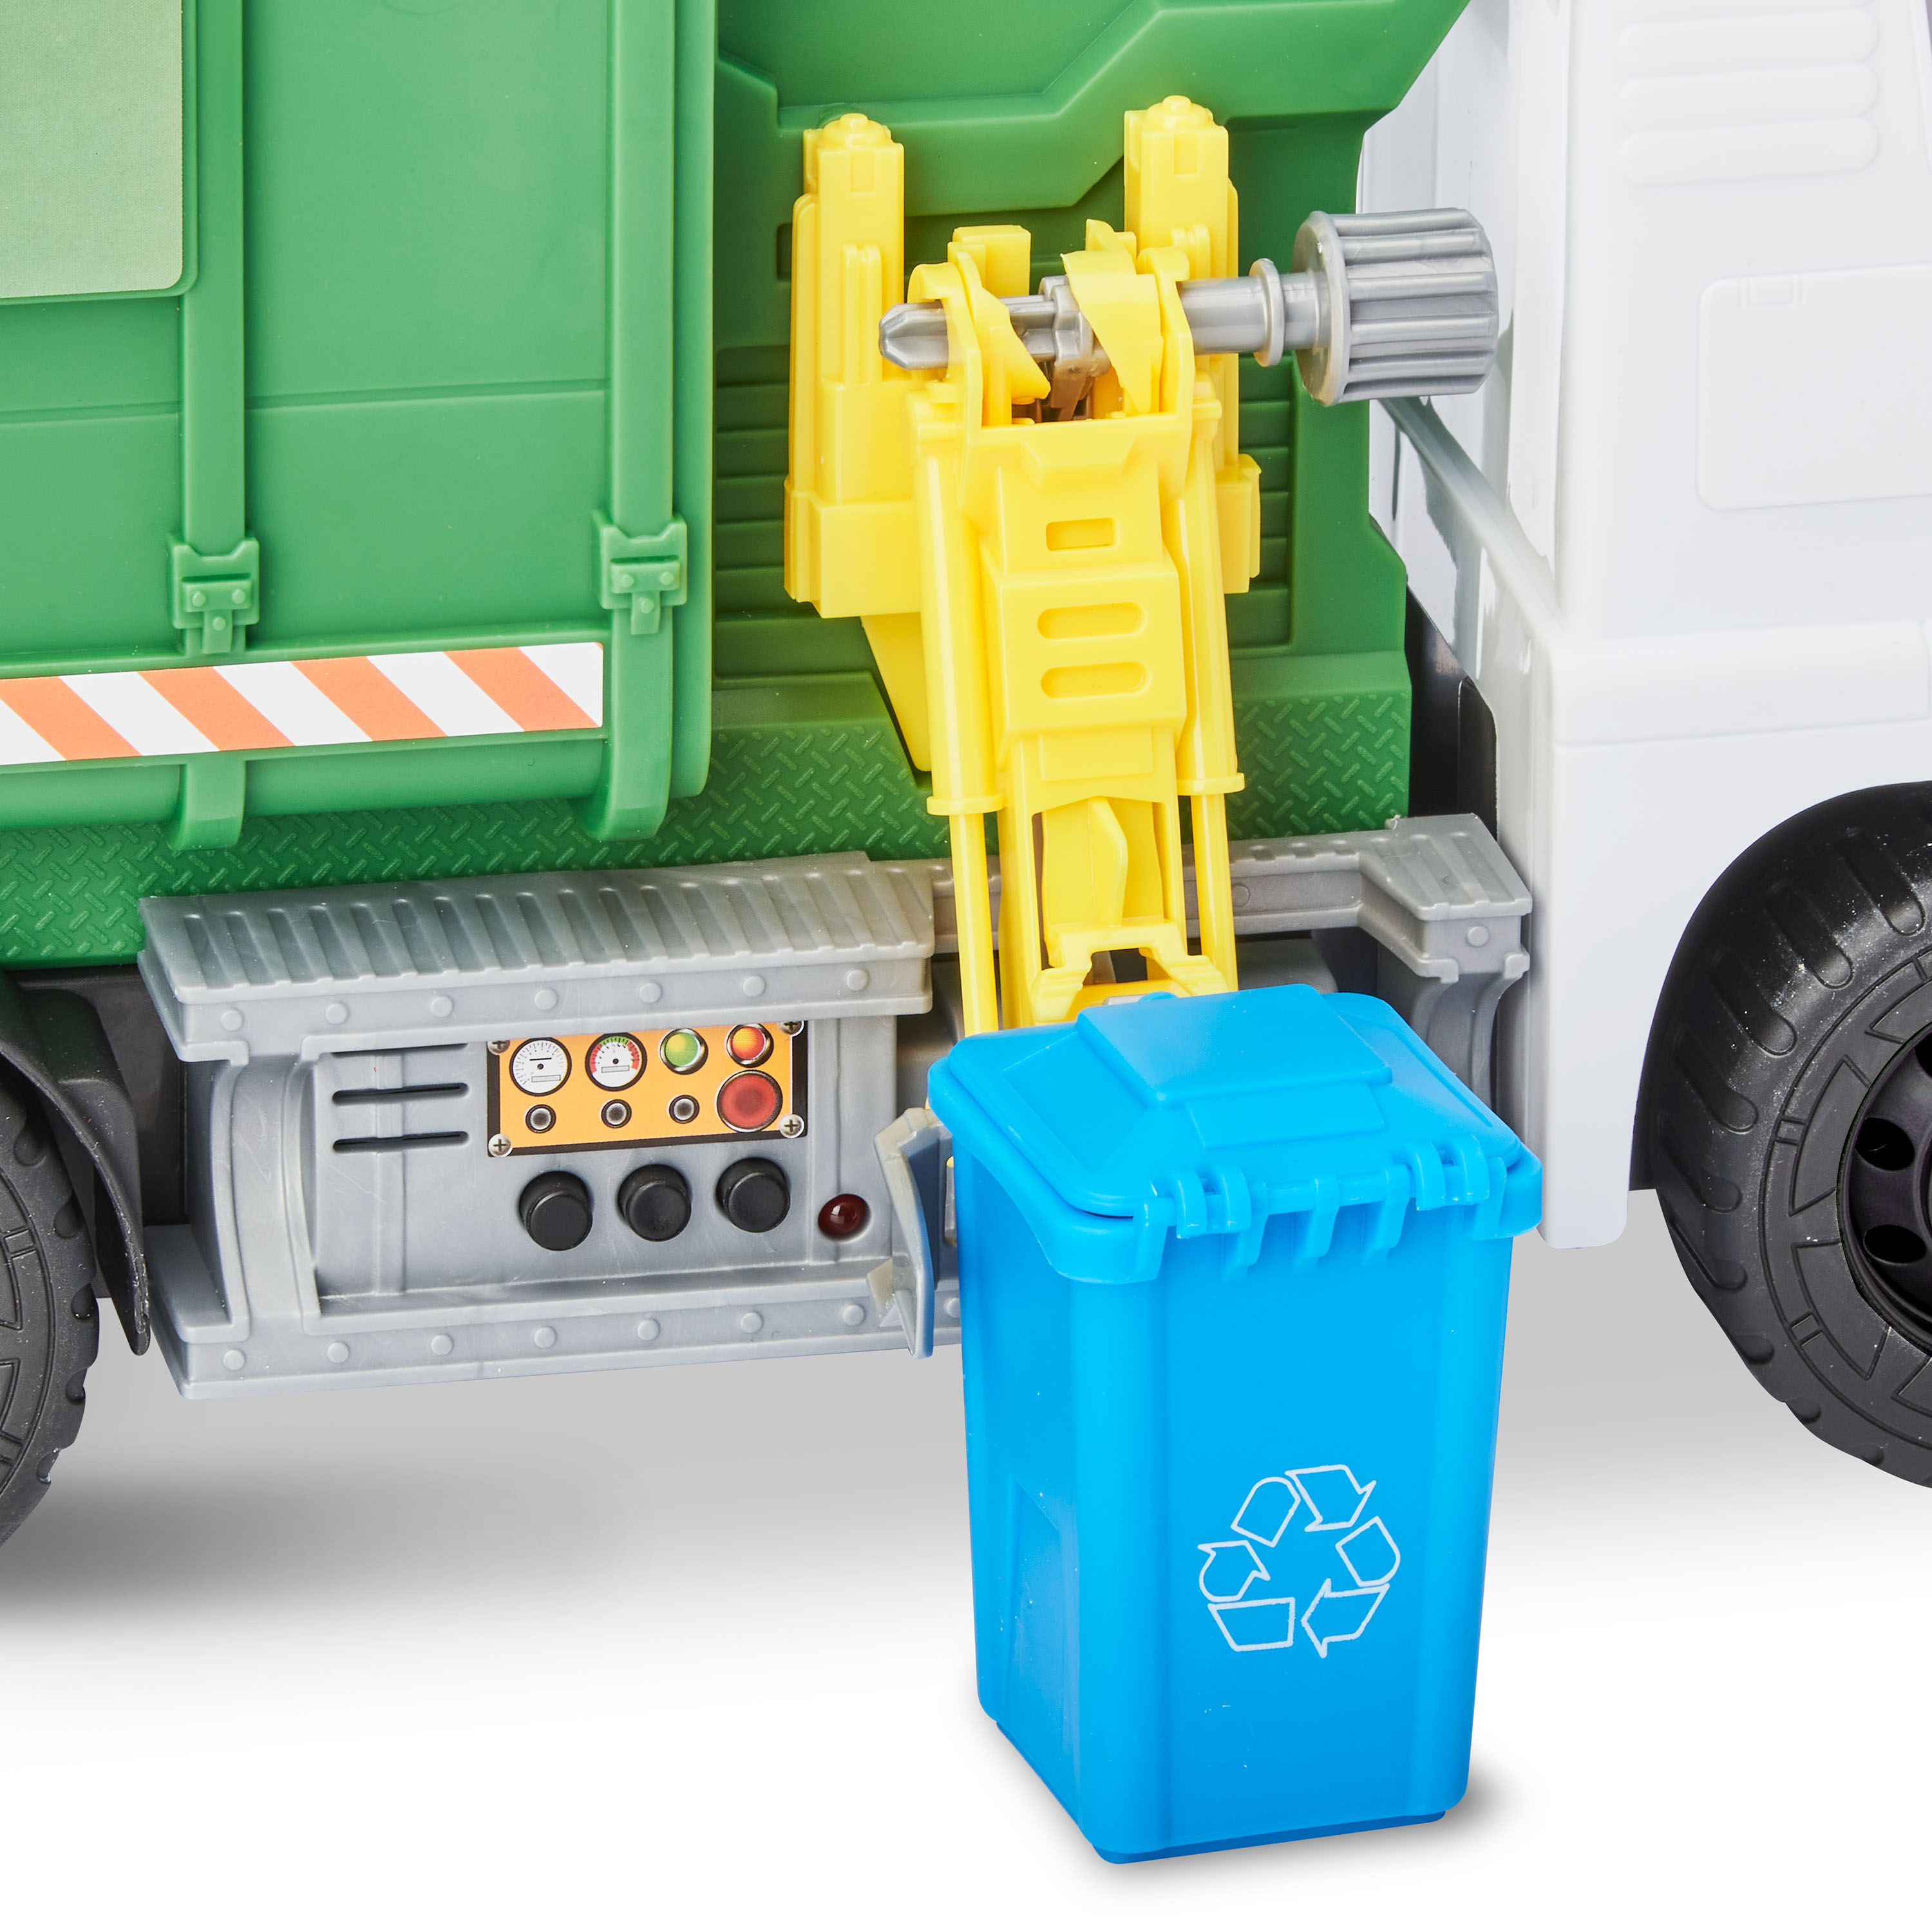 Kid Connection Recycling Truck Play Set, 11 Pieces - image 3 of 6